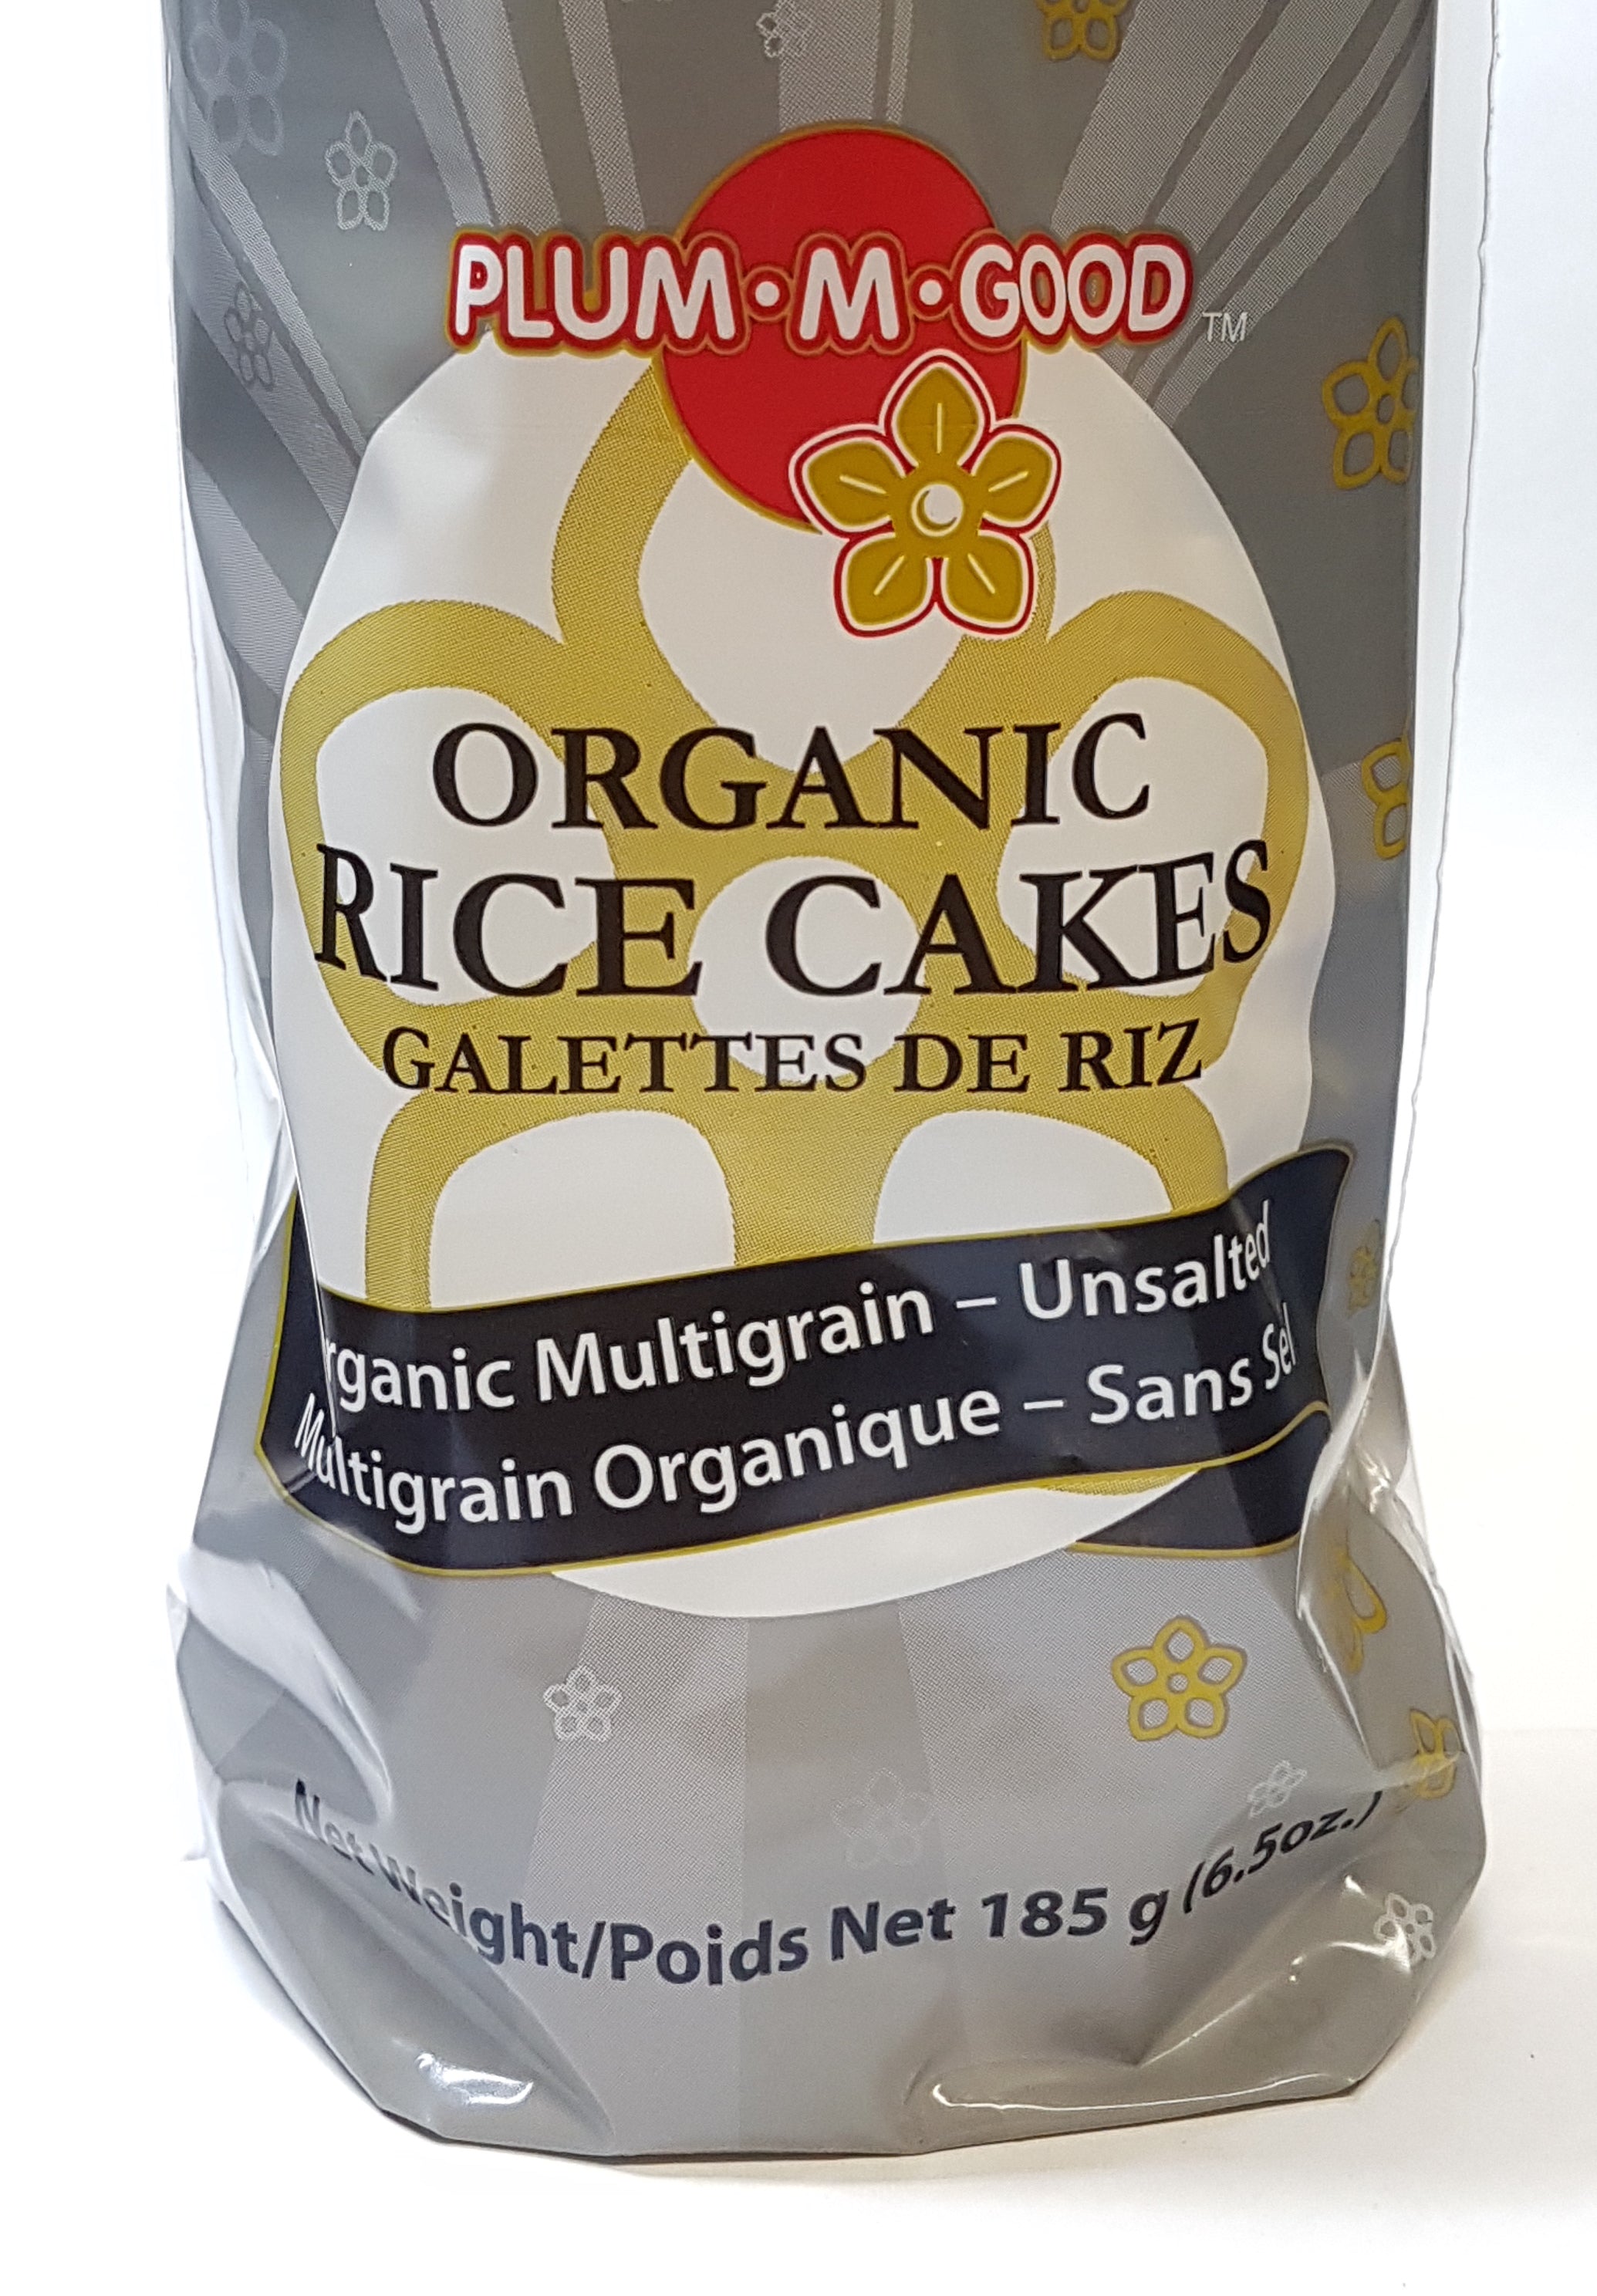 Organic Brown rice cakes - Clearspring